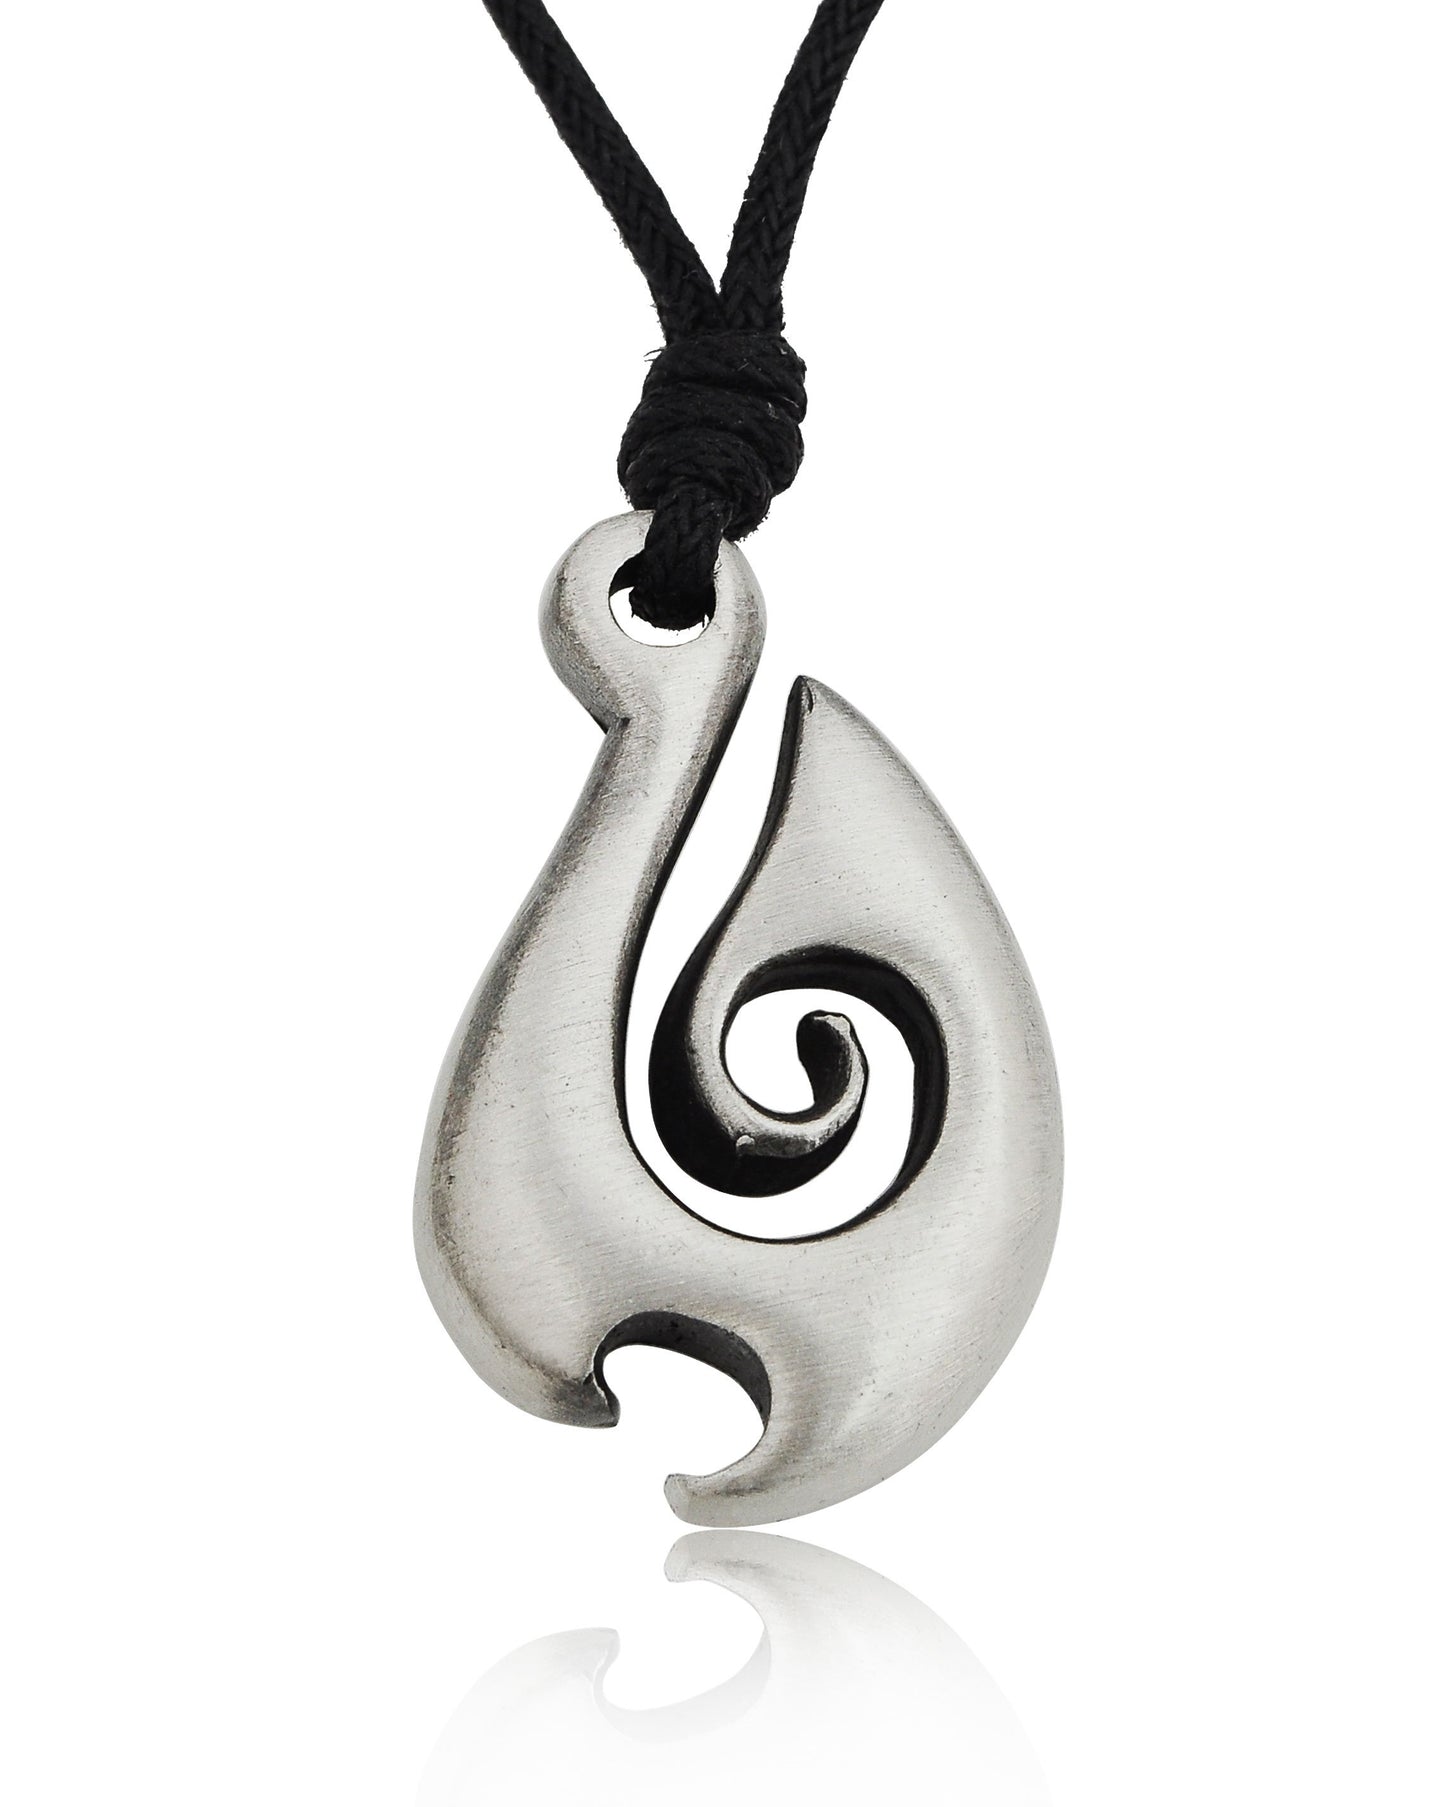 Maori Fishing Hook Silver Pewter Charm Necklace Pendant Jewelry